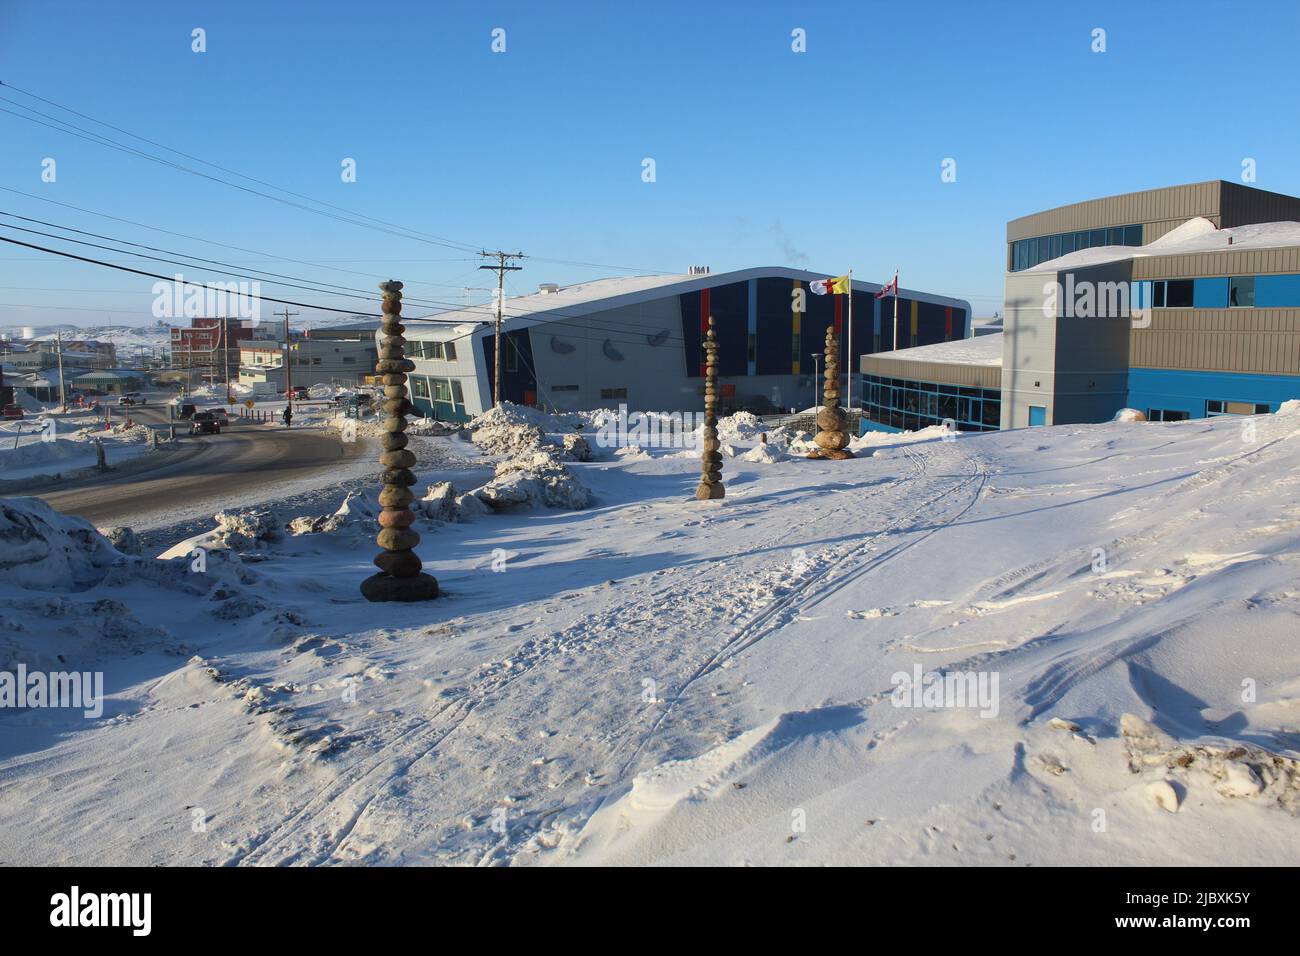 Sports and recreation center in Iqaluit, Nunavut, Canada Stock Photo